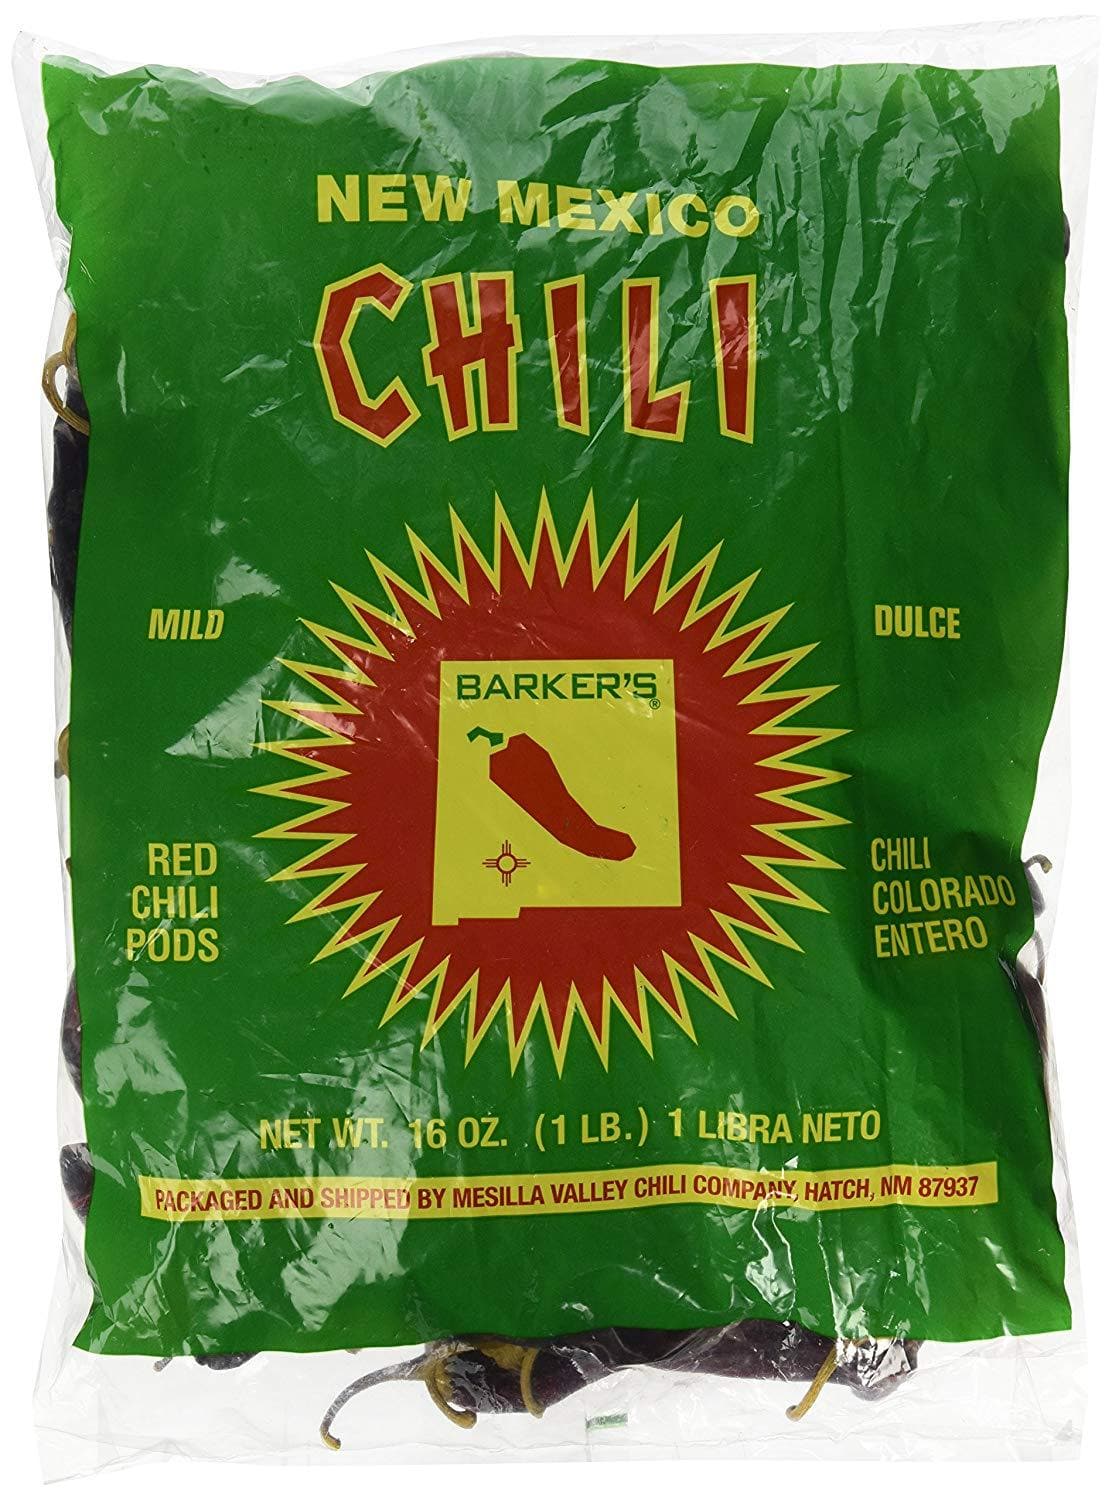 A bag of Dried Hatch Red Chile Pods featuring vibrant green packaging with bold red and yellow text, containing mild red chili pods. The packaging highlights its origin from Hatch Valley, New Mexico.